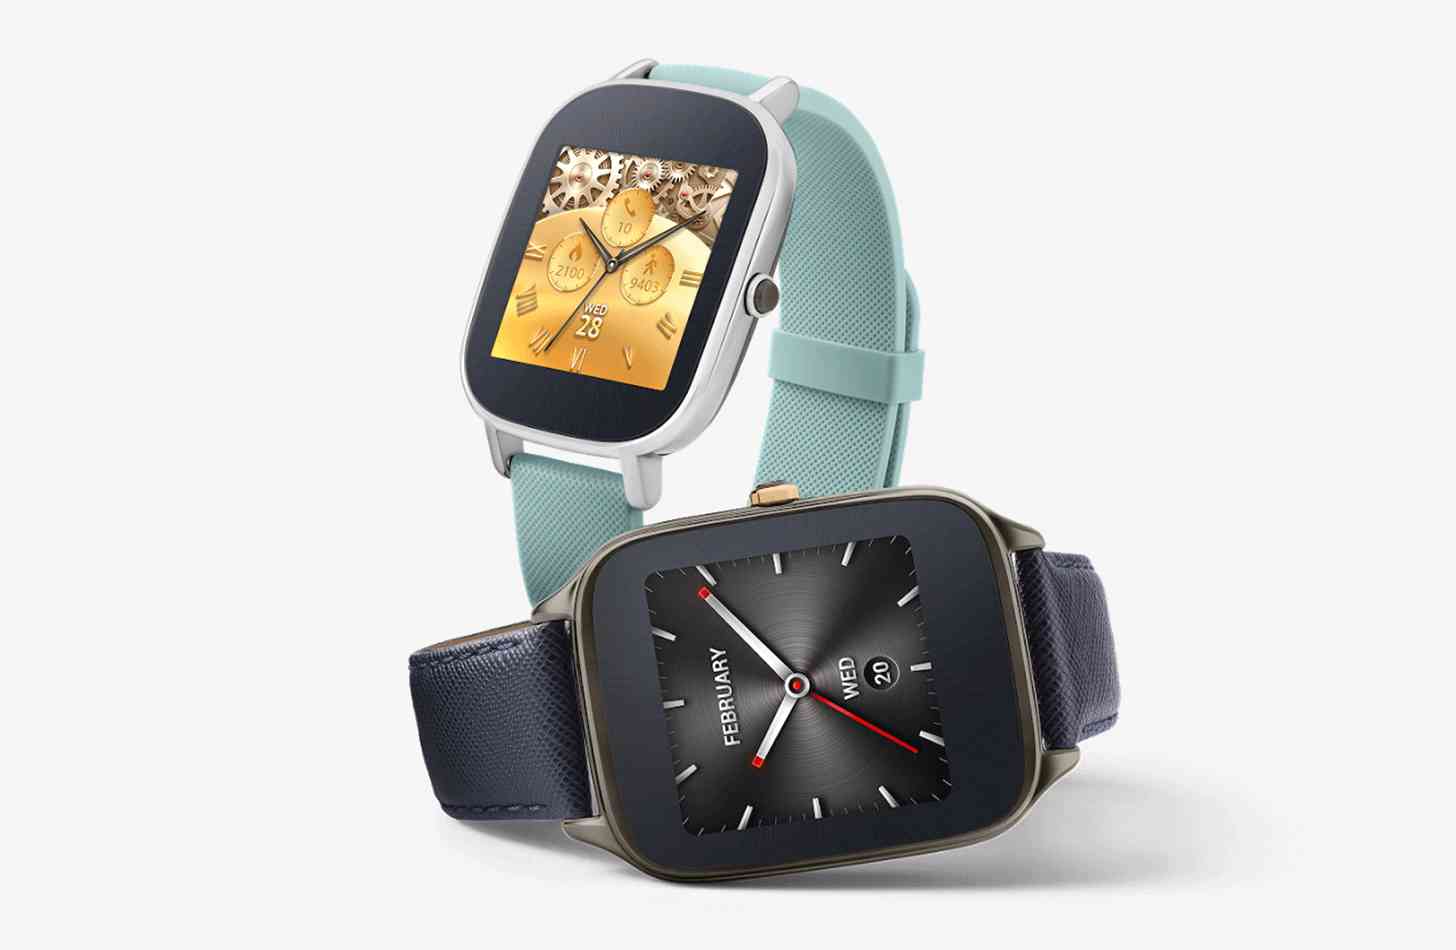 ASUS ZenWatch 2 large